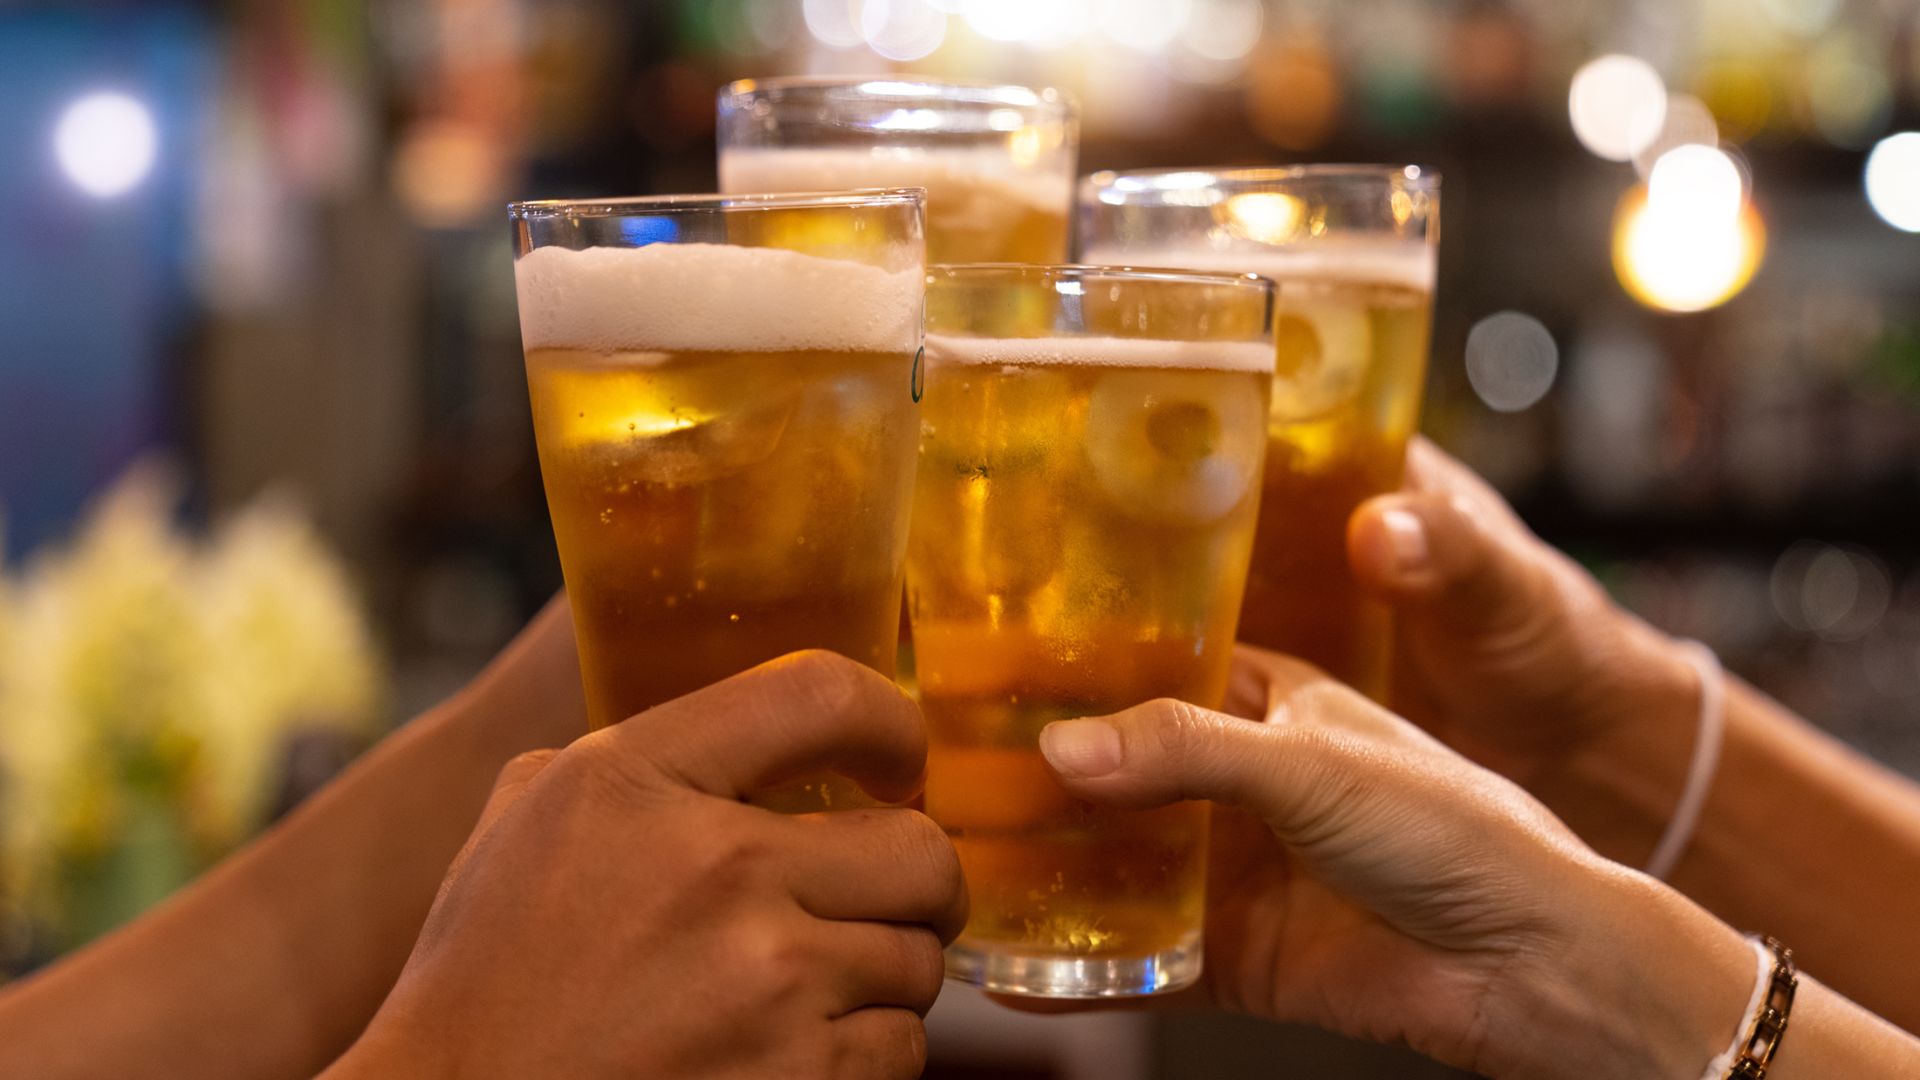 A Group Of Hands Holding Glasses Of Beer